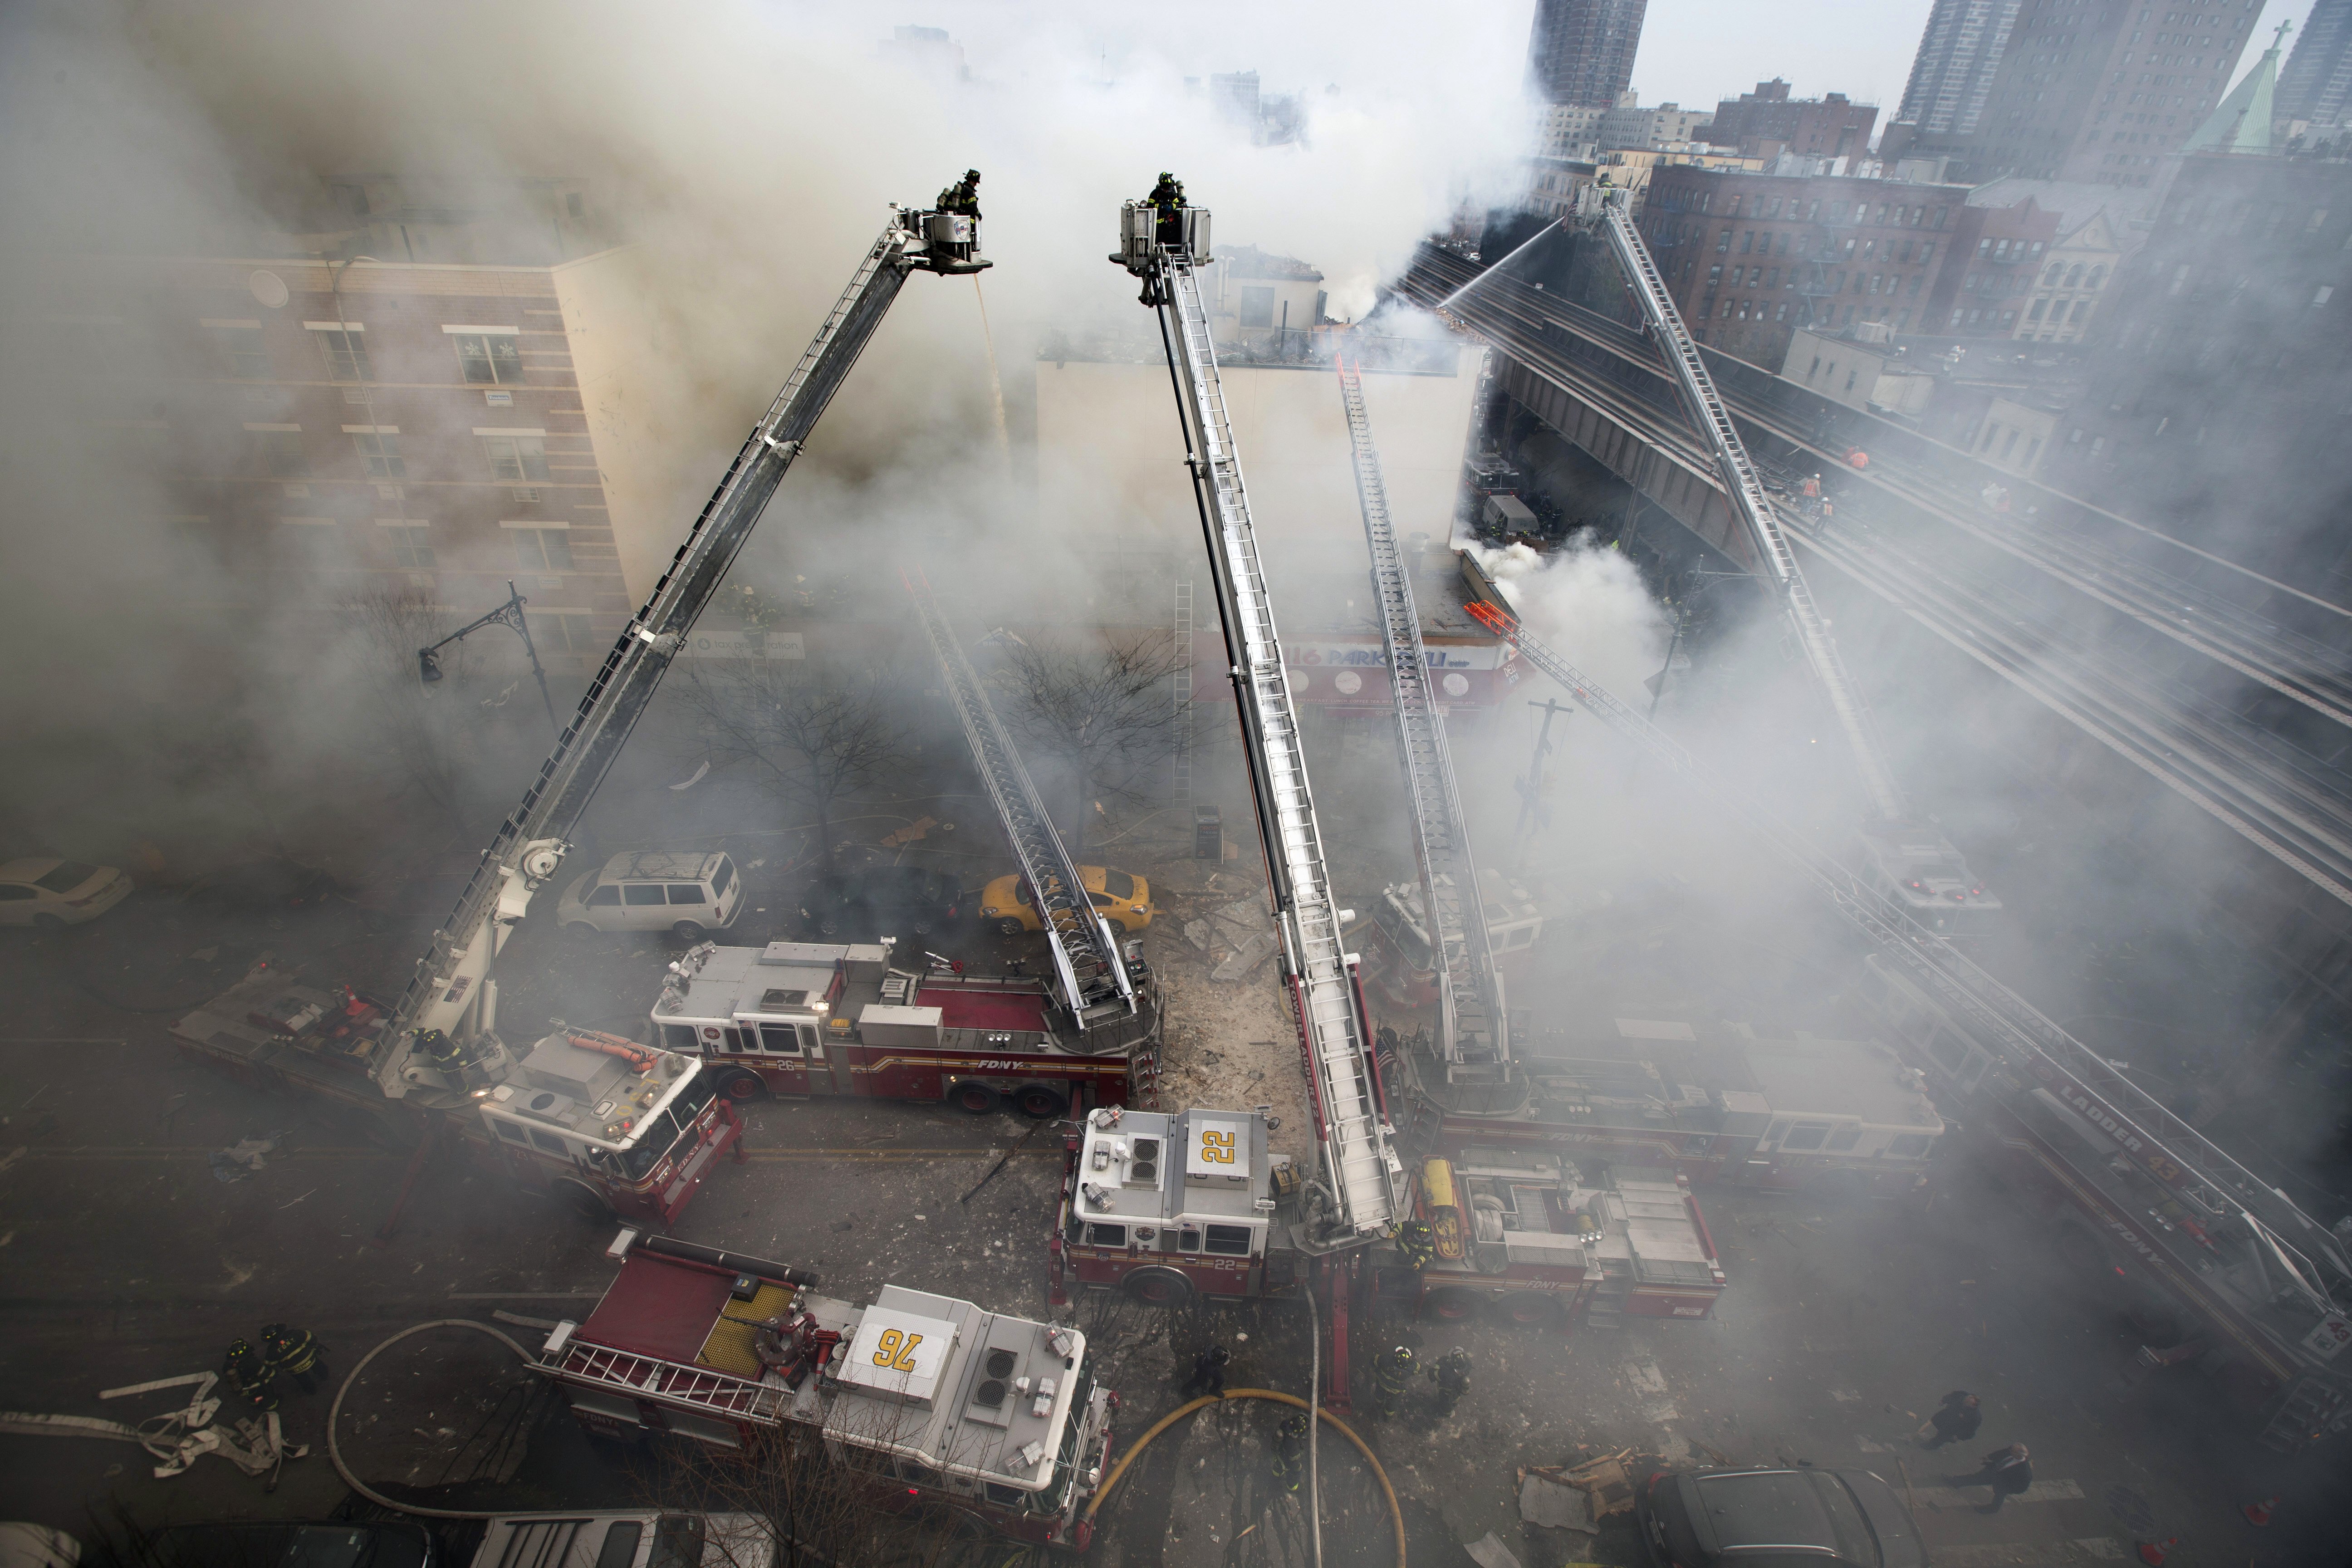 Firefighters respond to an explosion that leveled two apartment buildings in East Harlem.